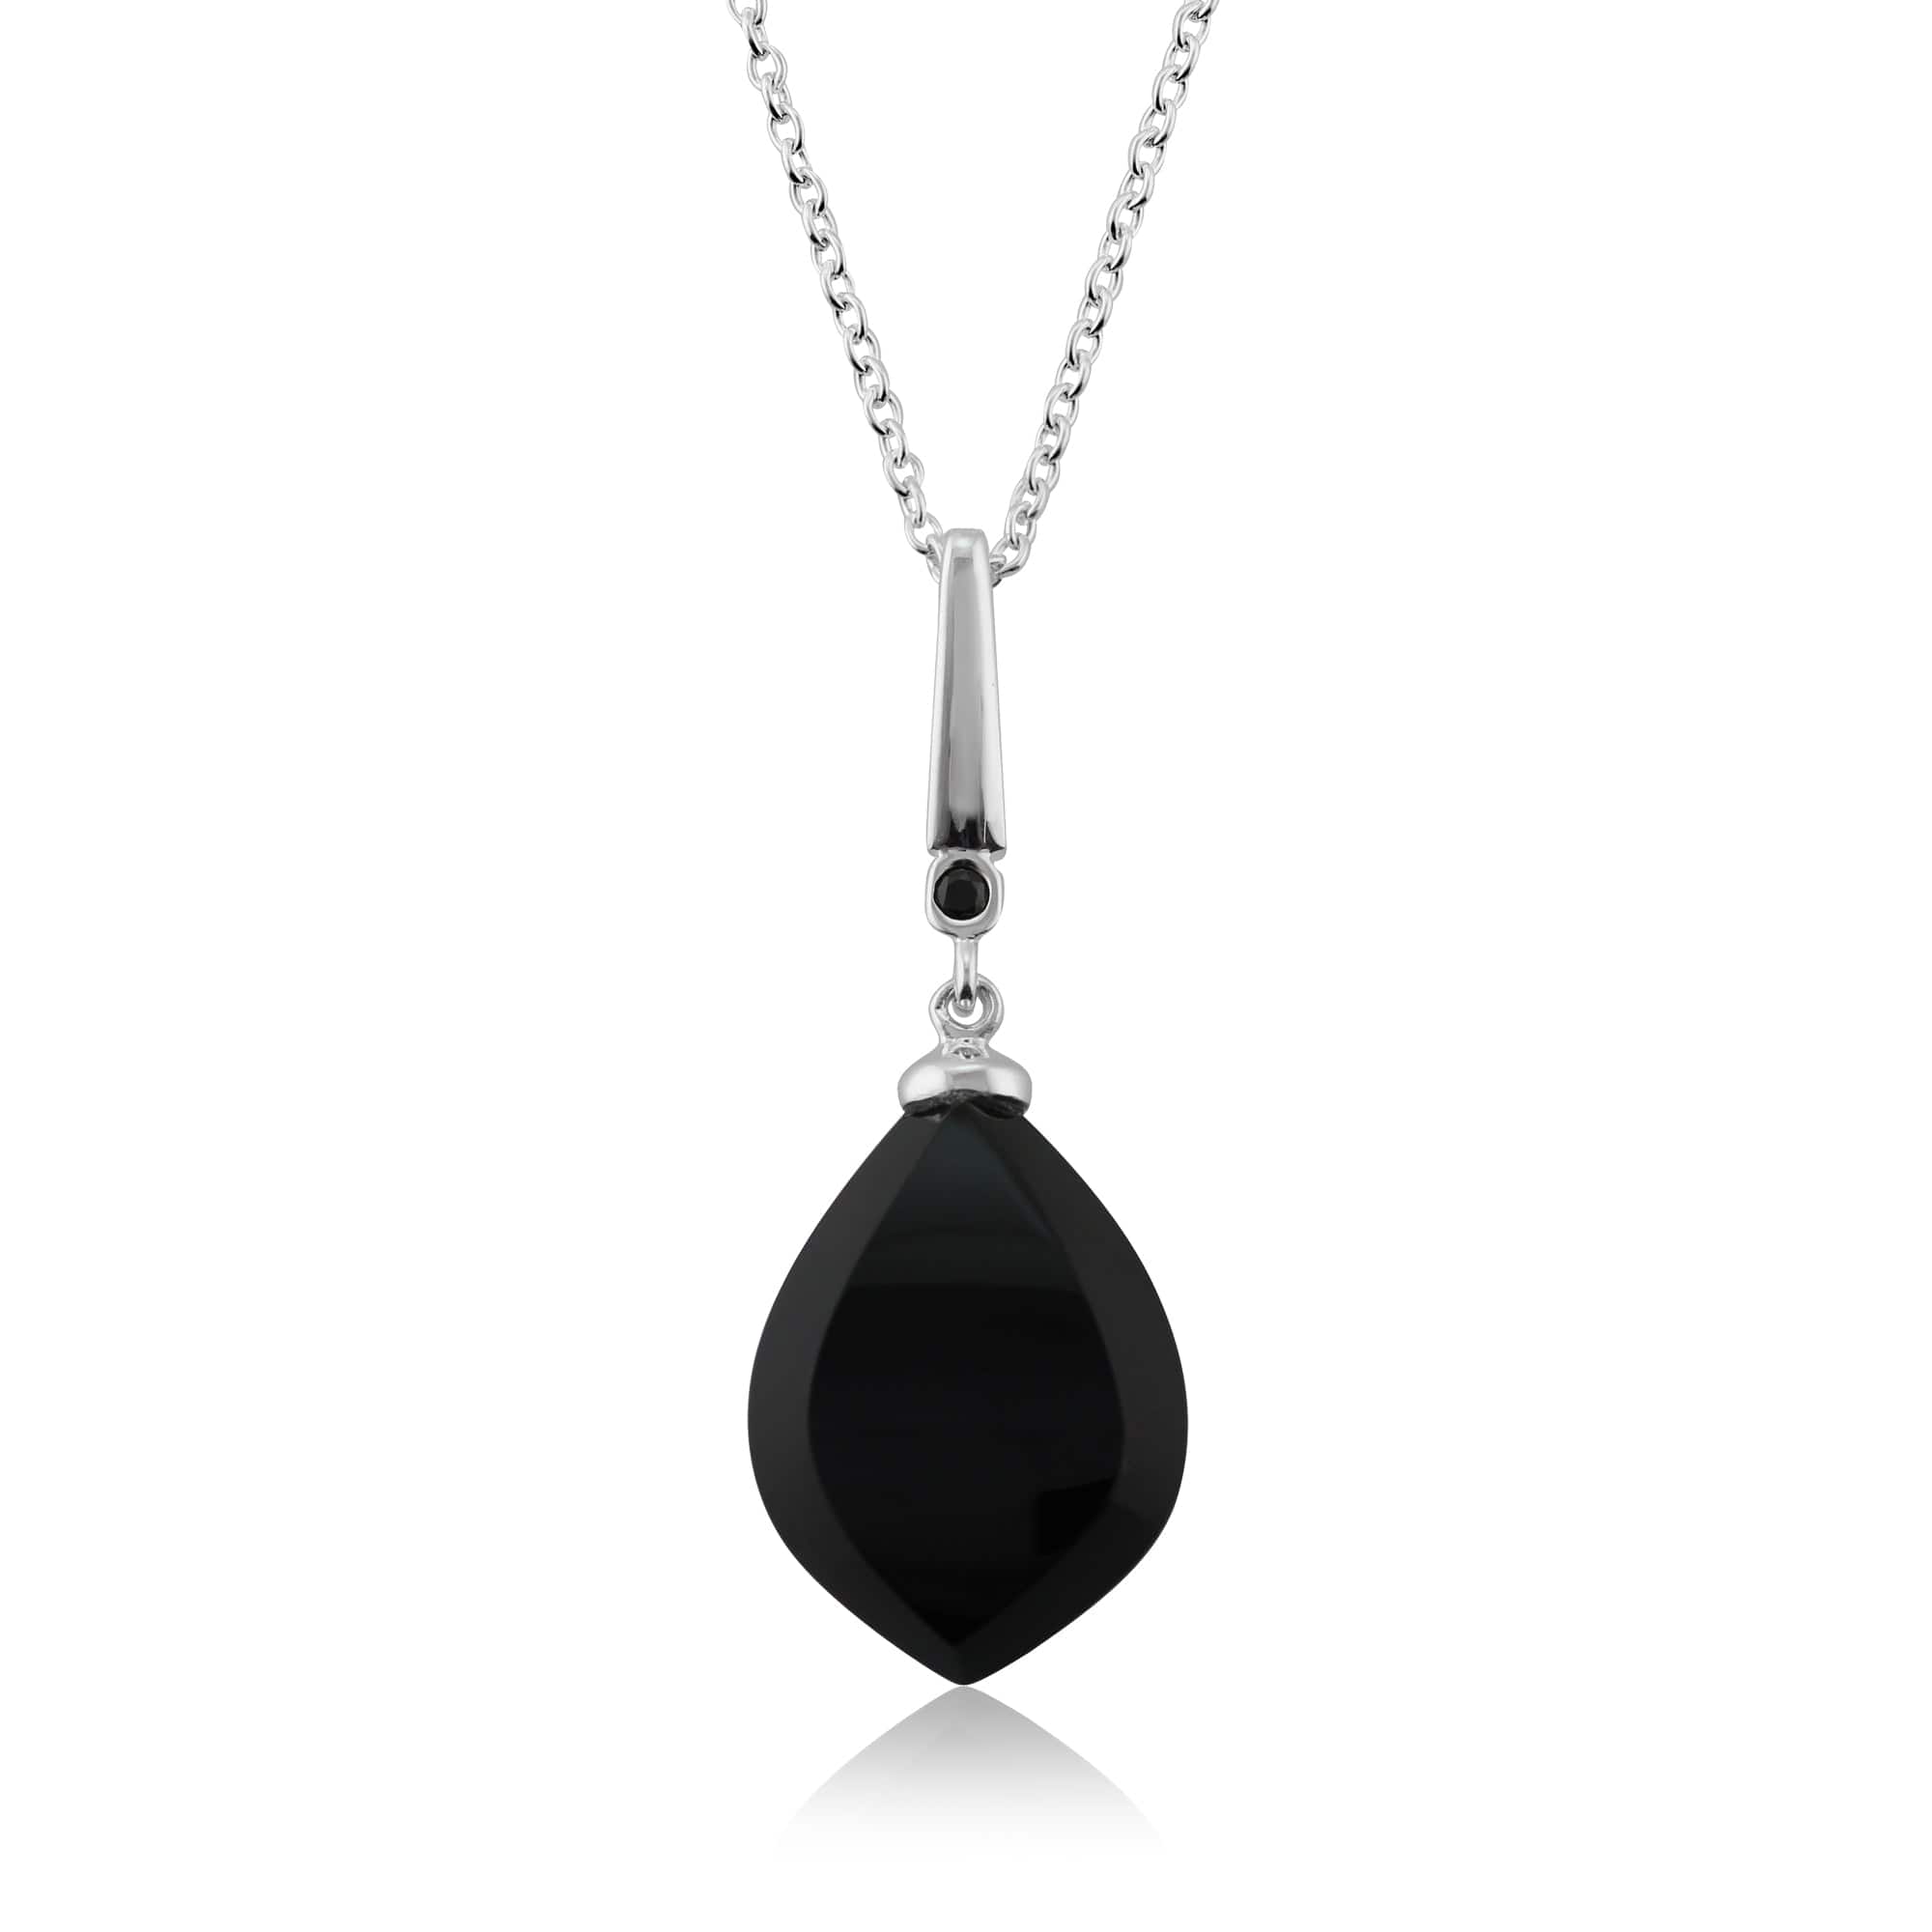 Art Deco Style Black Onyx Cabochon & Black Spinel Pendant in Sterling Silver